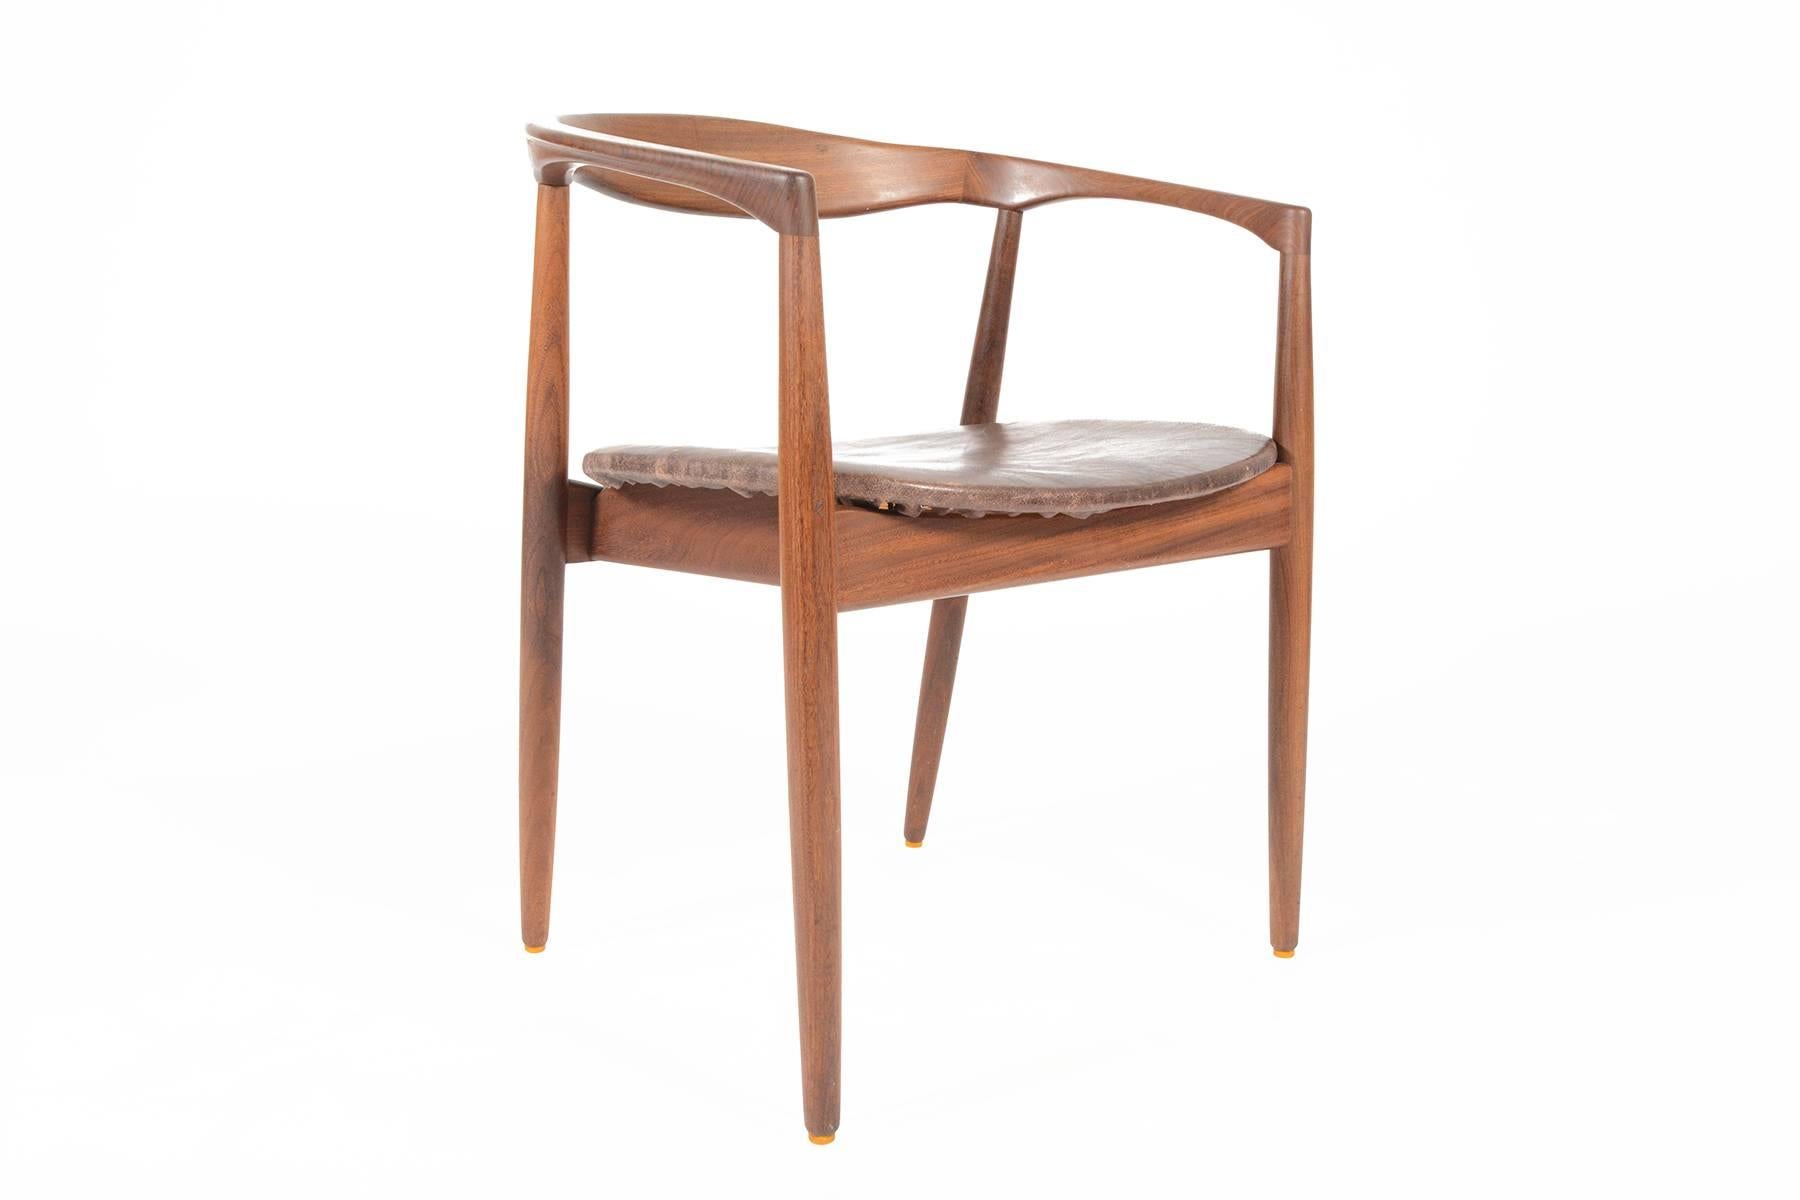 This Danish modern mid century side chair was designed by Kai Kristiansen for Magnus Olesen in 1959. The curved solid teak back extends into armrests for a comfortable and ergonomic feel. Excellent craftsmanship throughout. The seat bottom wears its